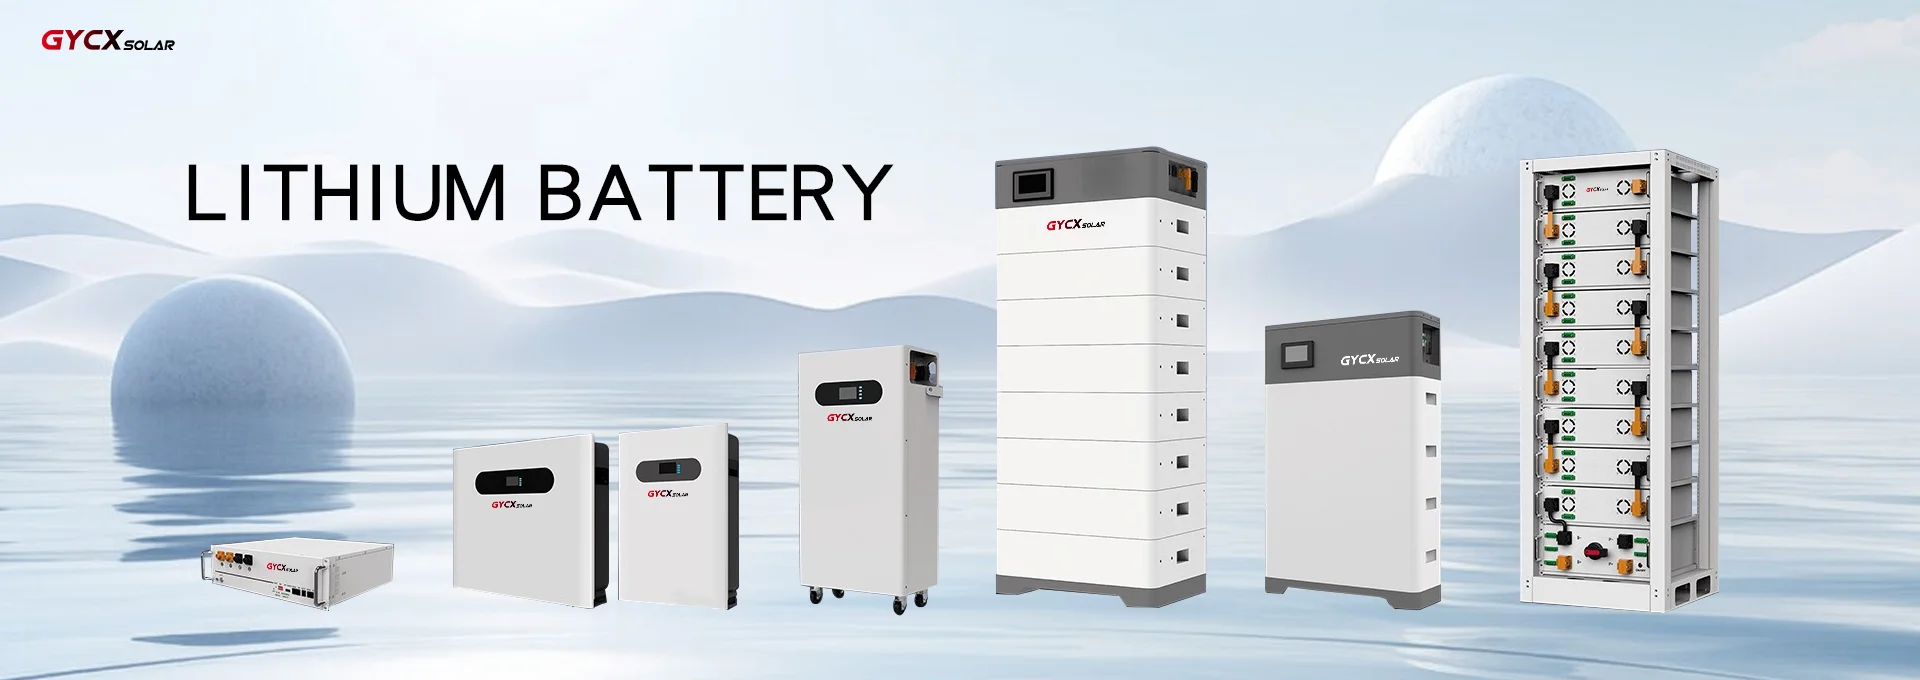 GYCX cost-effective lithium battery products: wall-mounted lithium battery